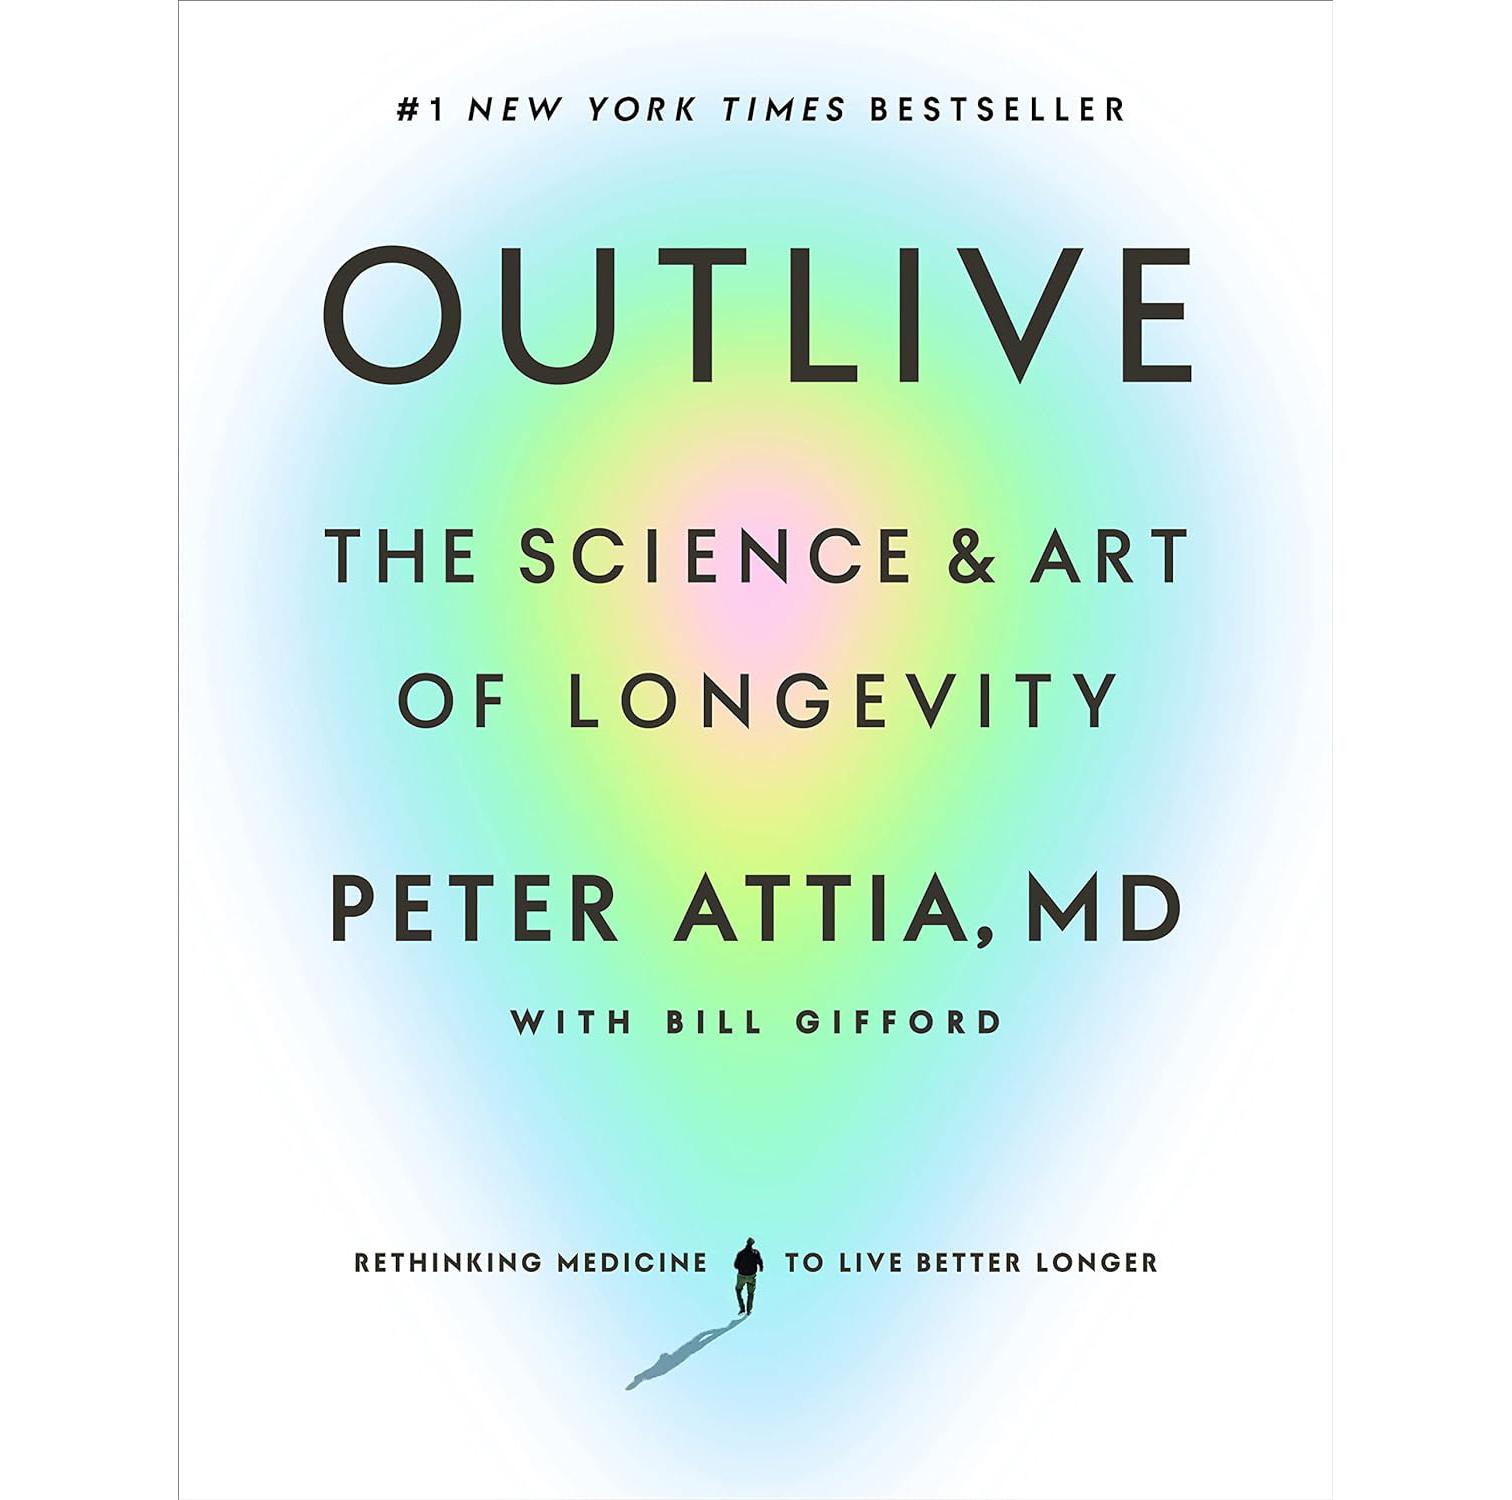 Outlive The Science and Art of Longevity for $2.99